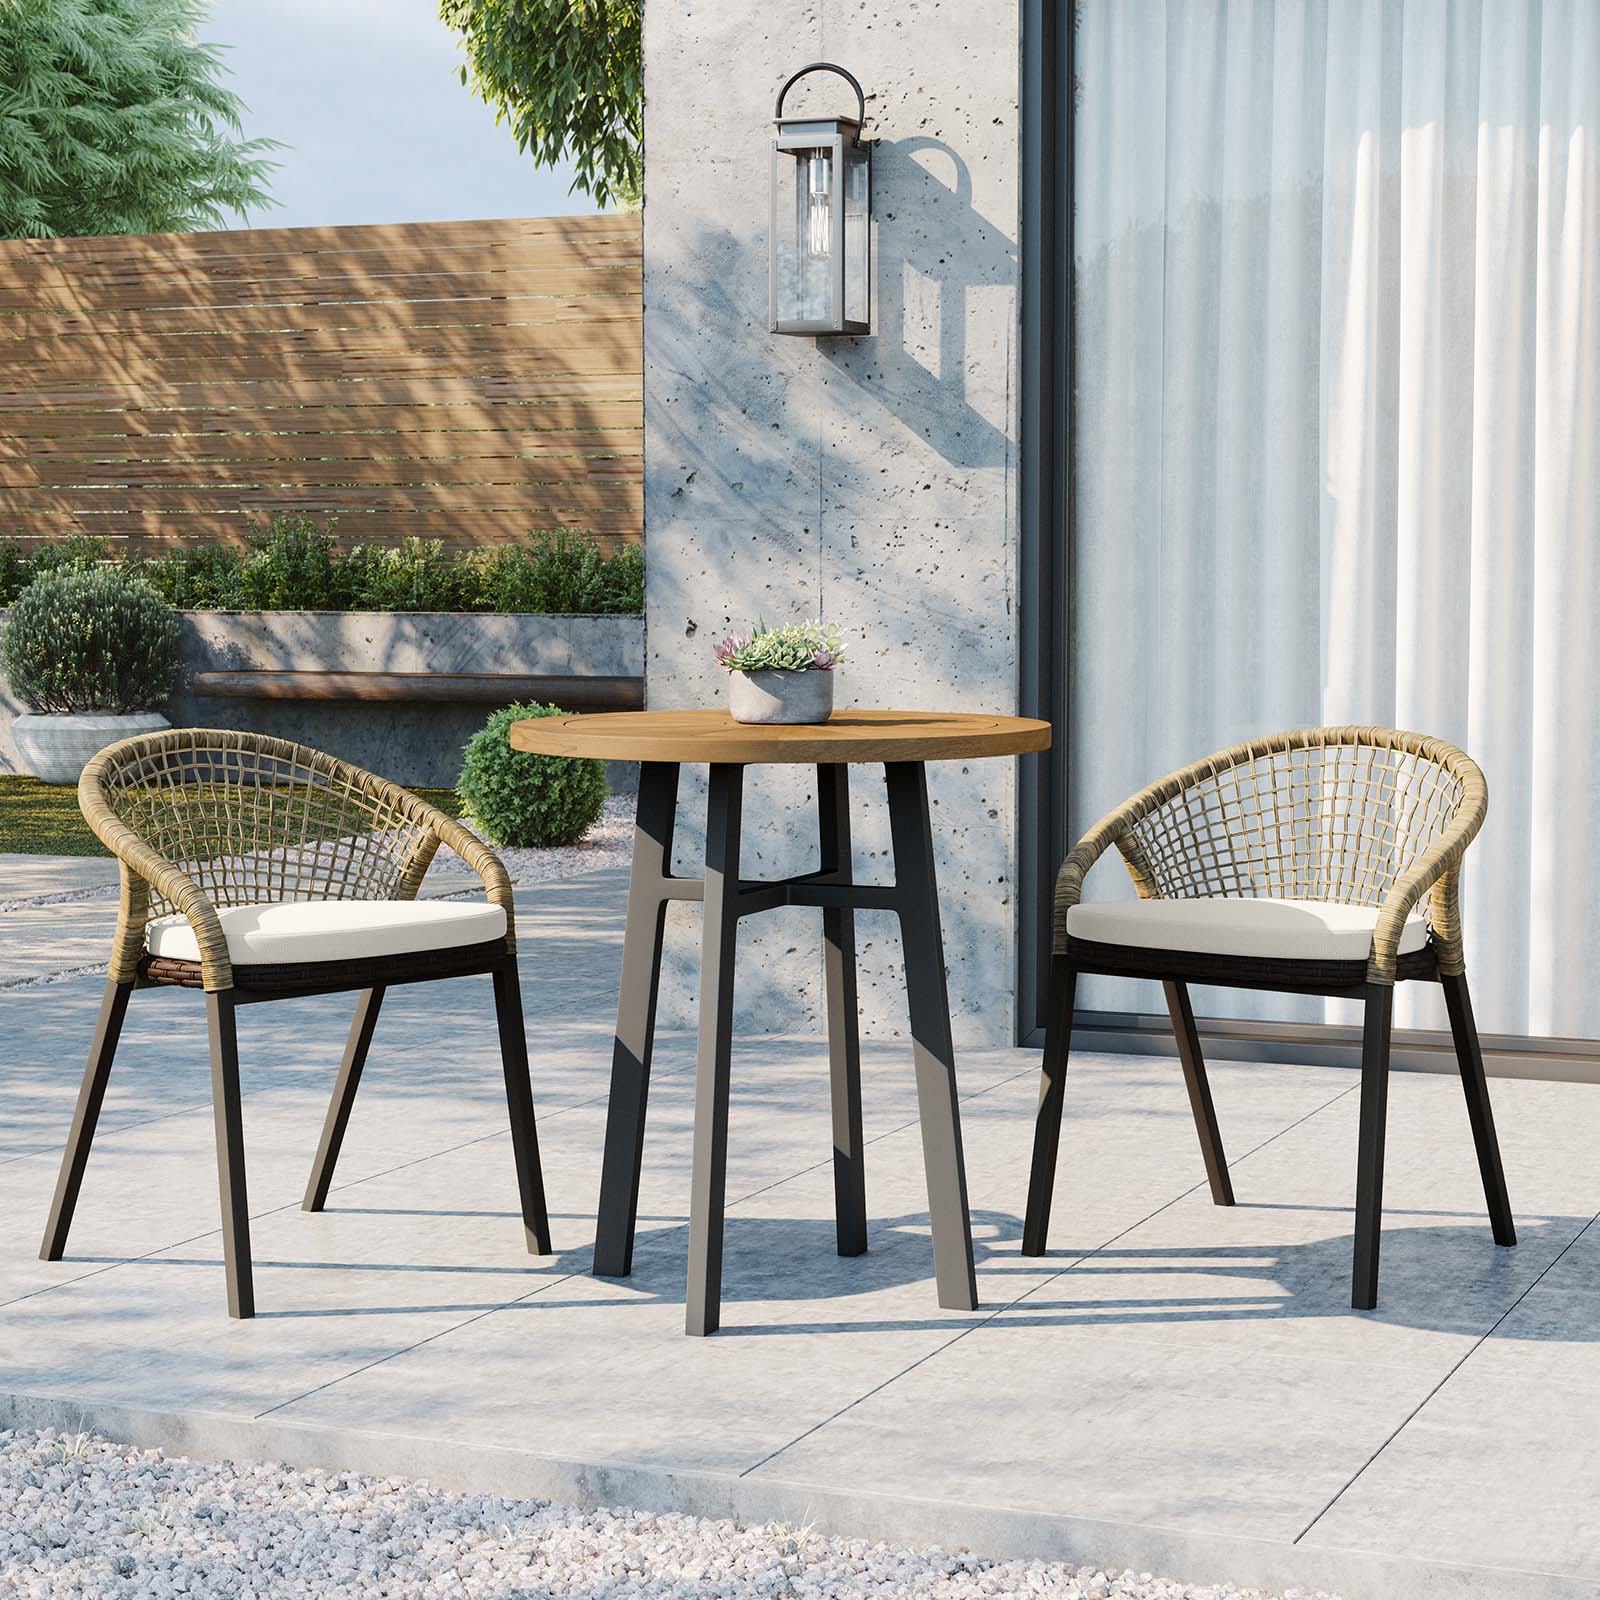 Meadow 3-Piece Outdoor Patio Dining Set - East Shore Modern Home Furnishings